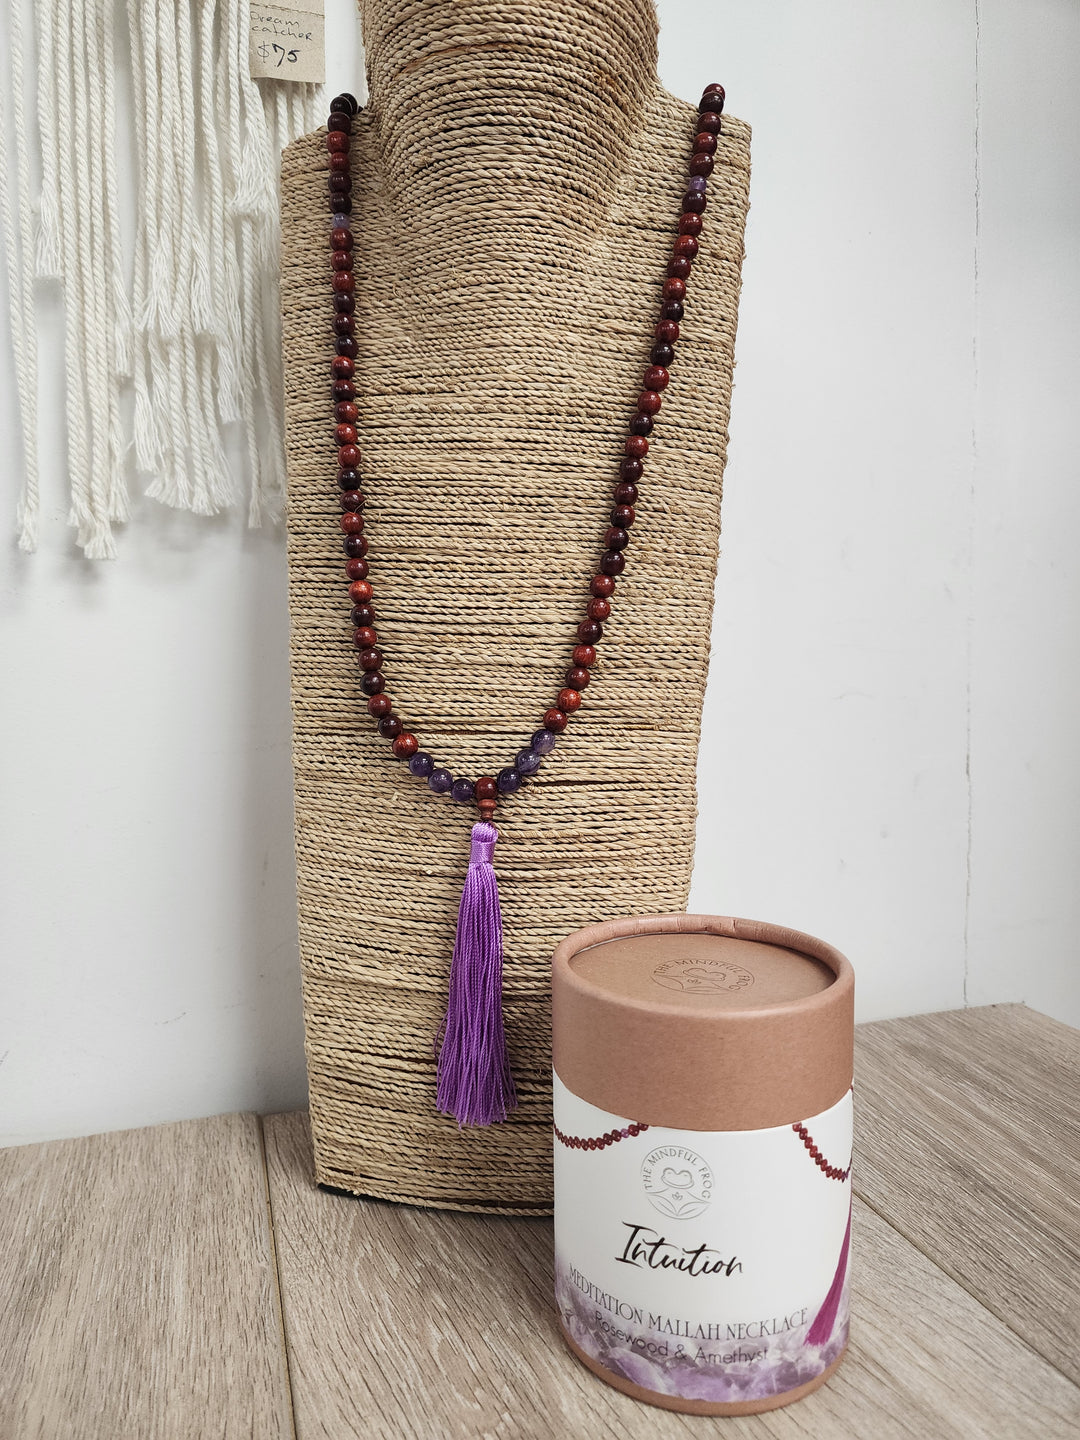 Mala Necklace - Intuition